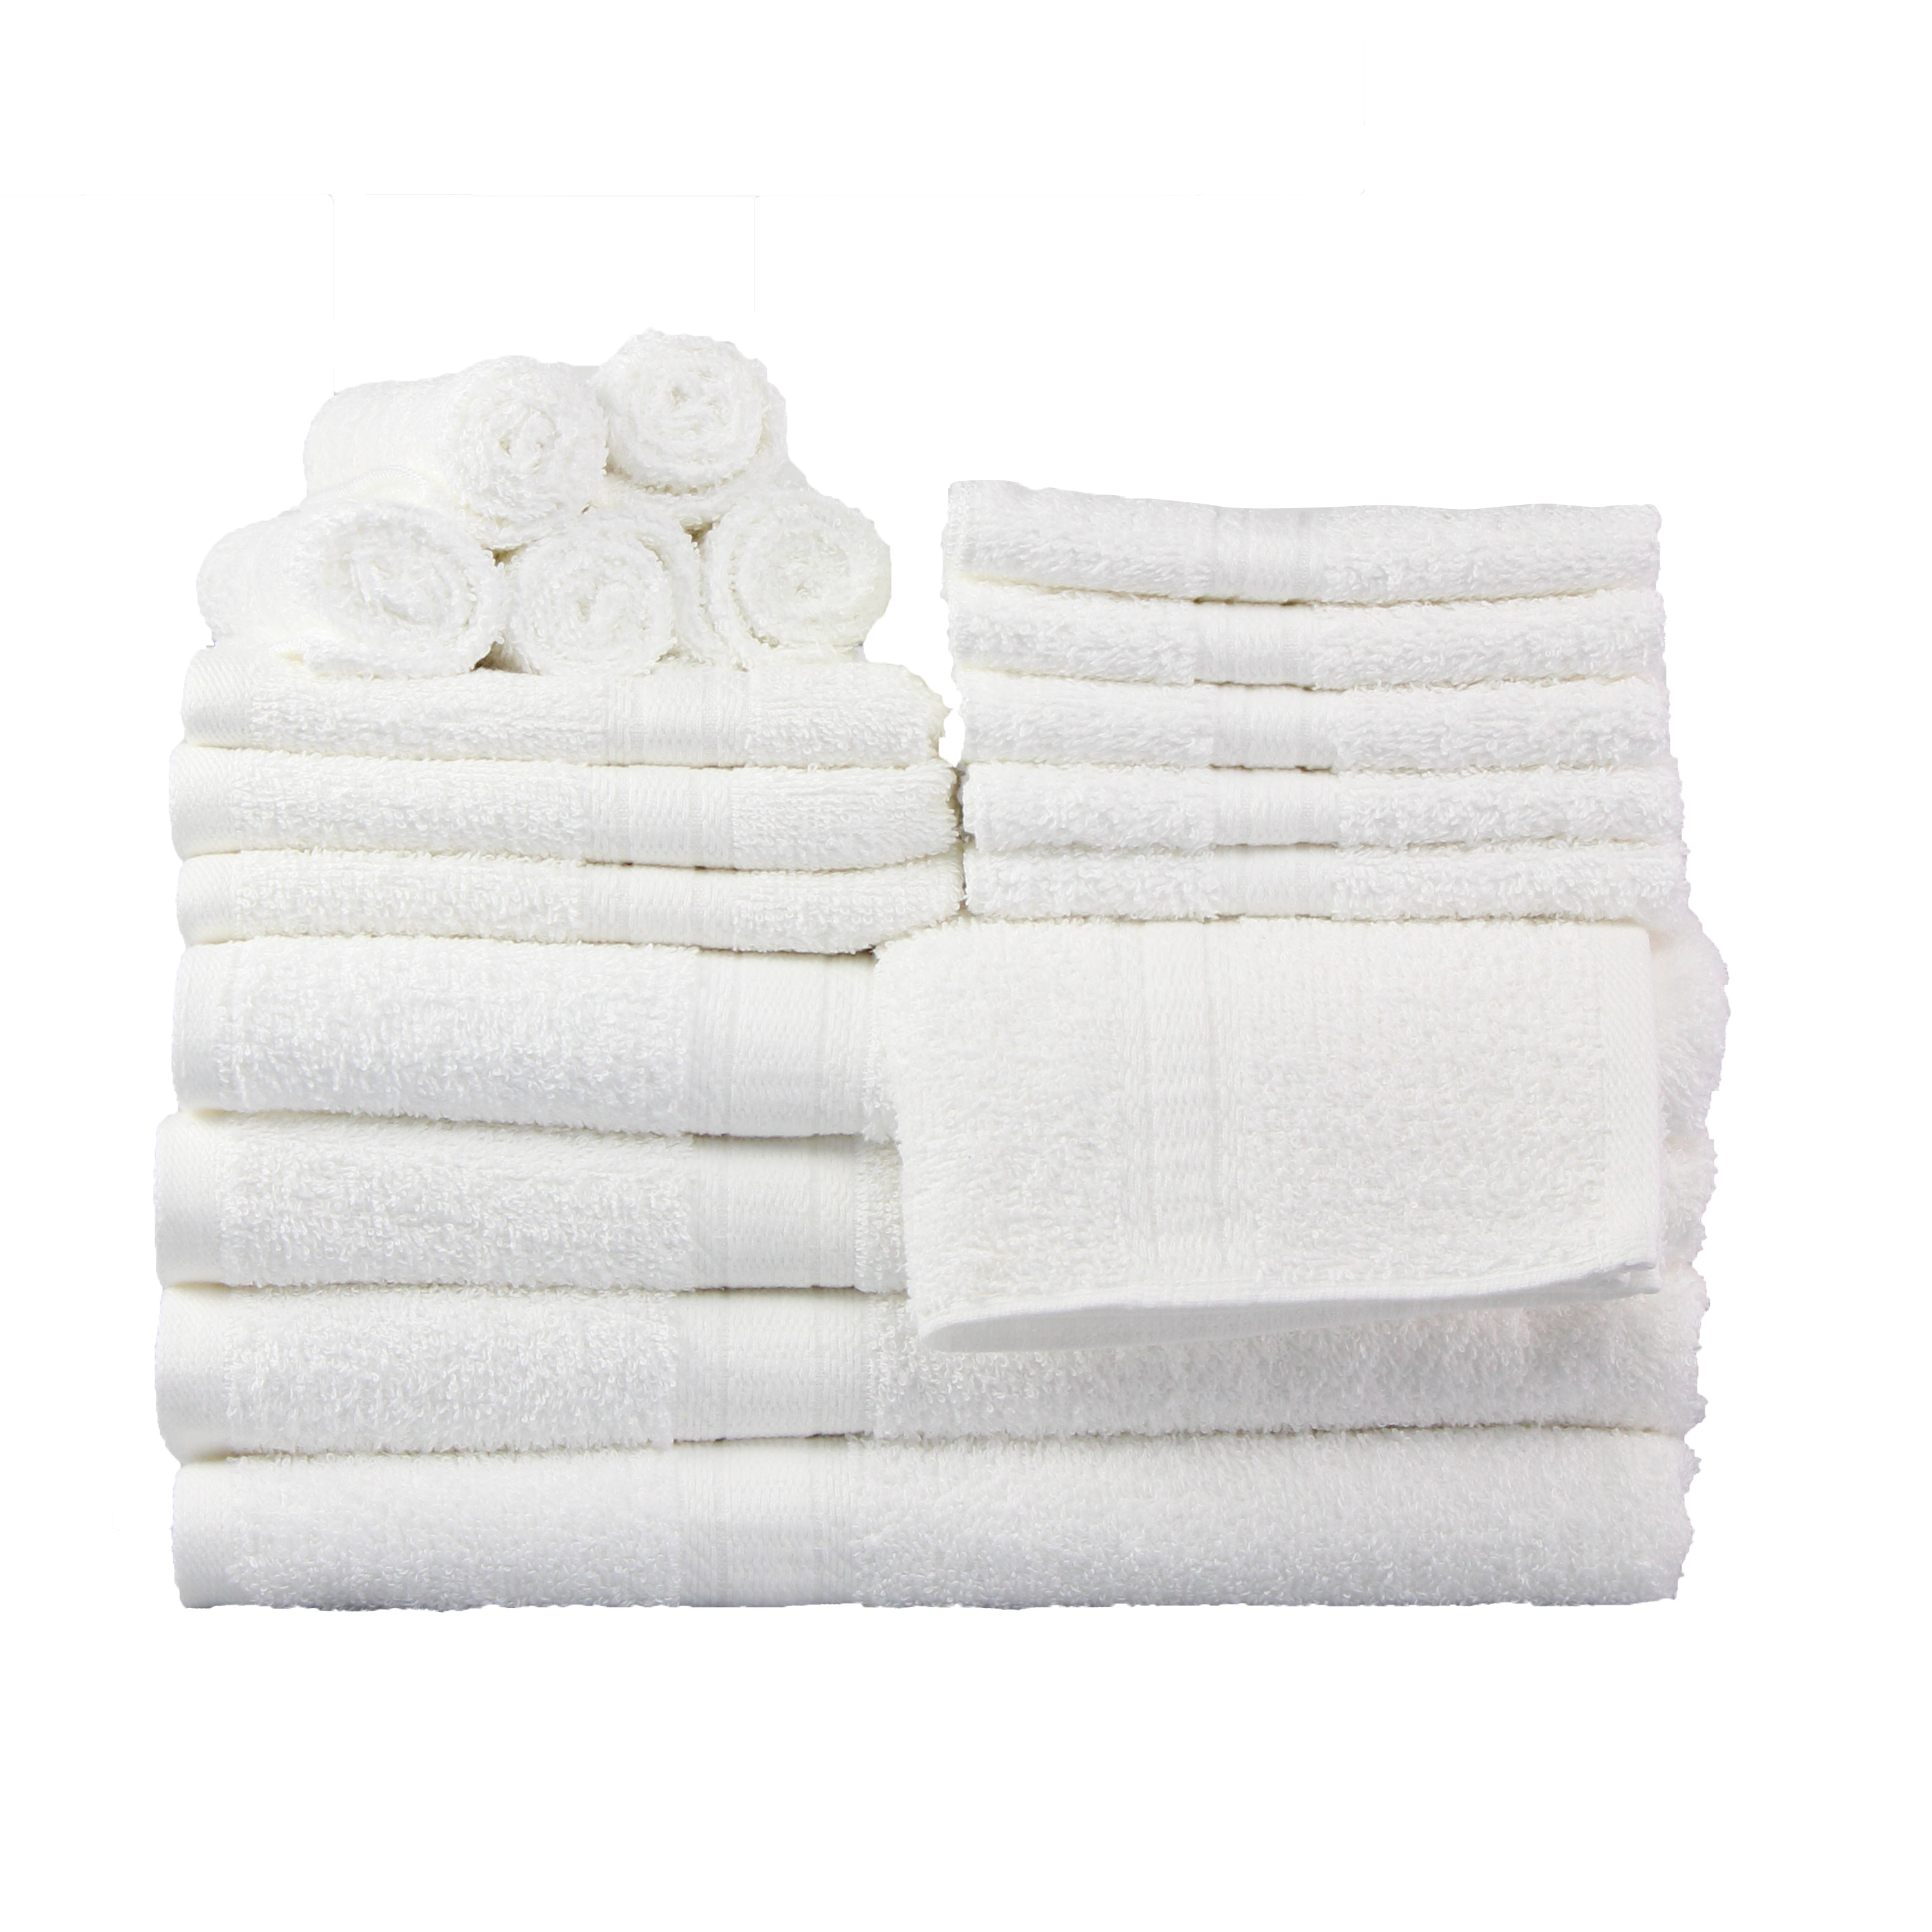 Mainstays Basic Solid 18-Piece Bath Towel Set Collection, White - image 1 of 10